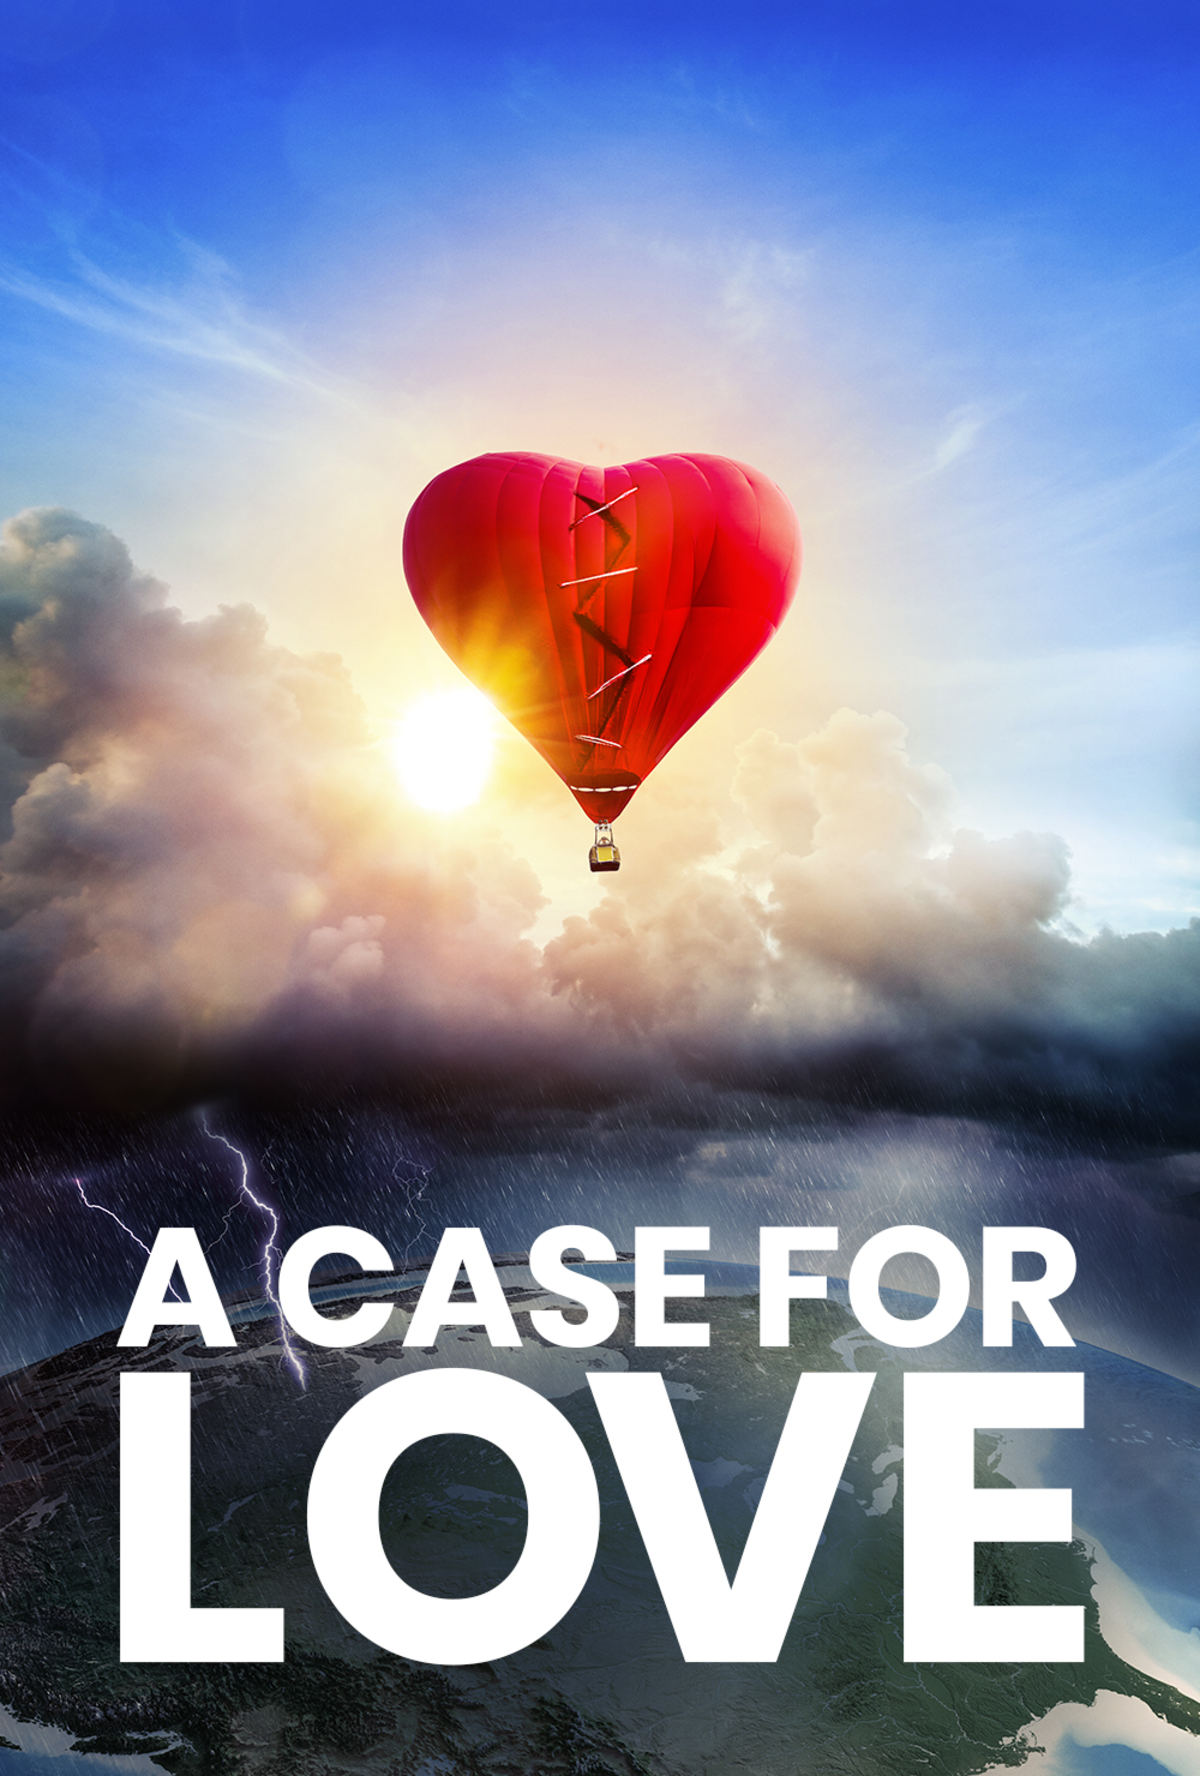 A Case For Love